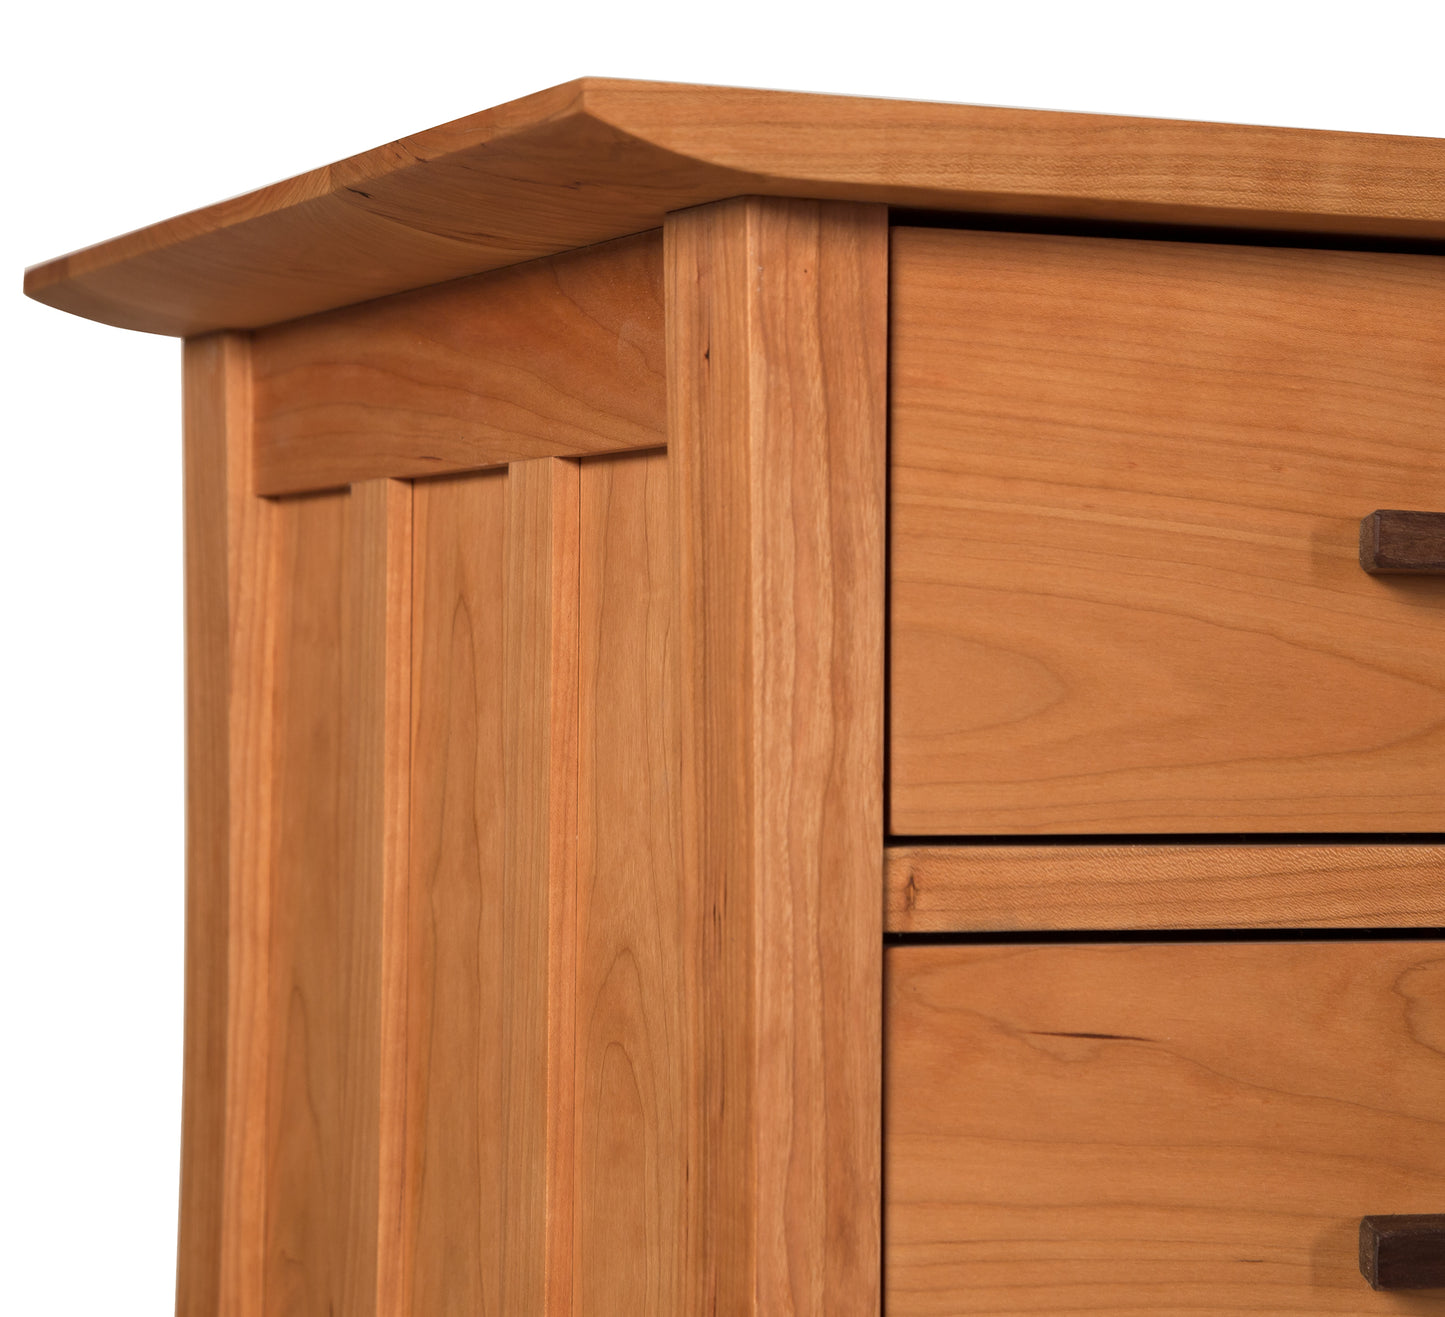 A close up of a Vermont Furniture Designs Contemporary Craftsman 3-Drawer Nightstand.